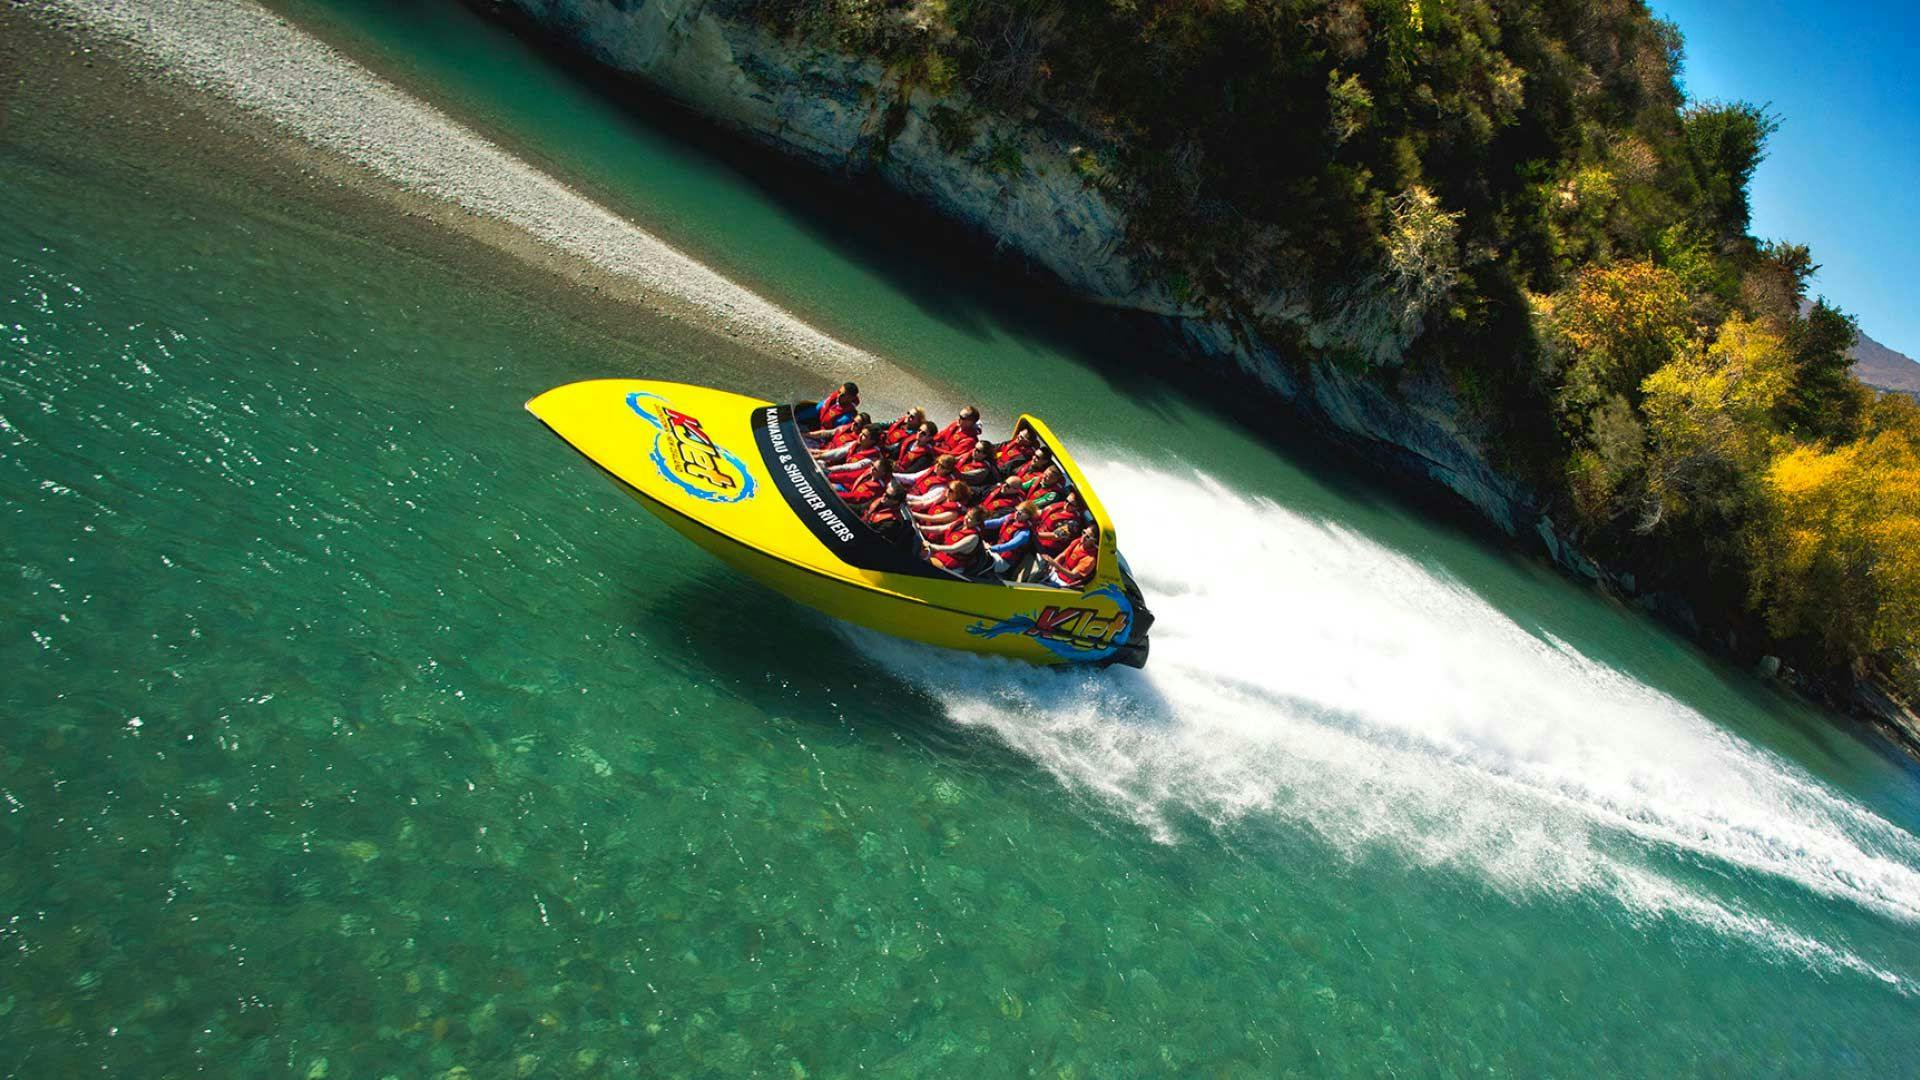 Jetboating on a river in Queenstown